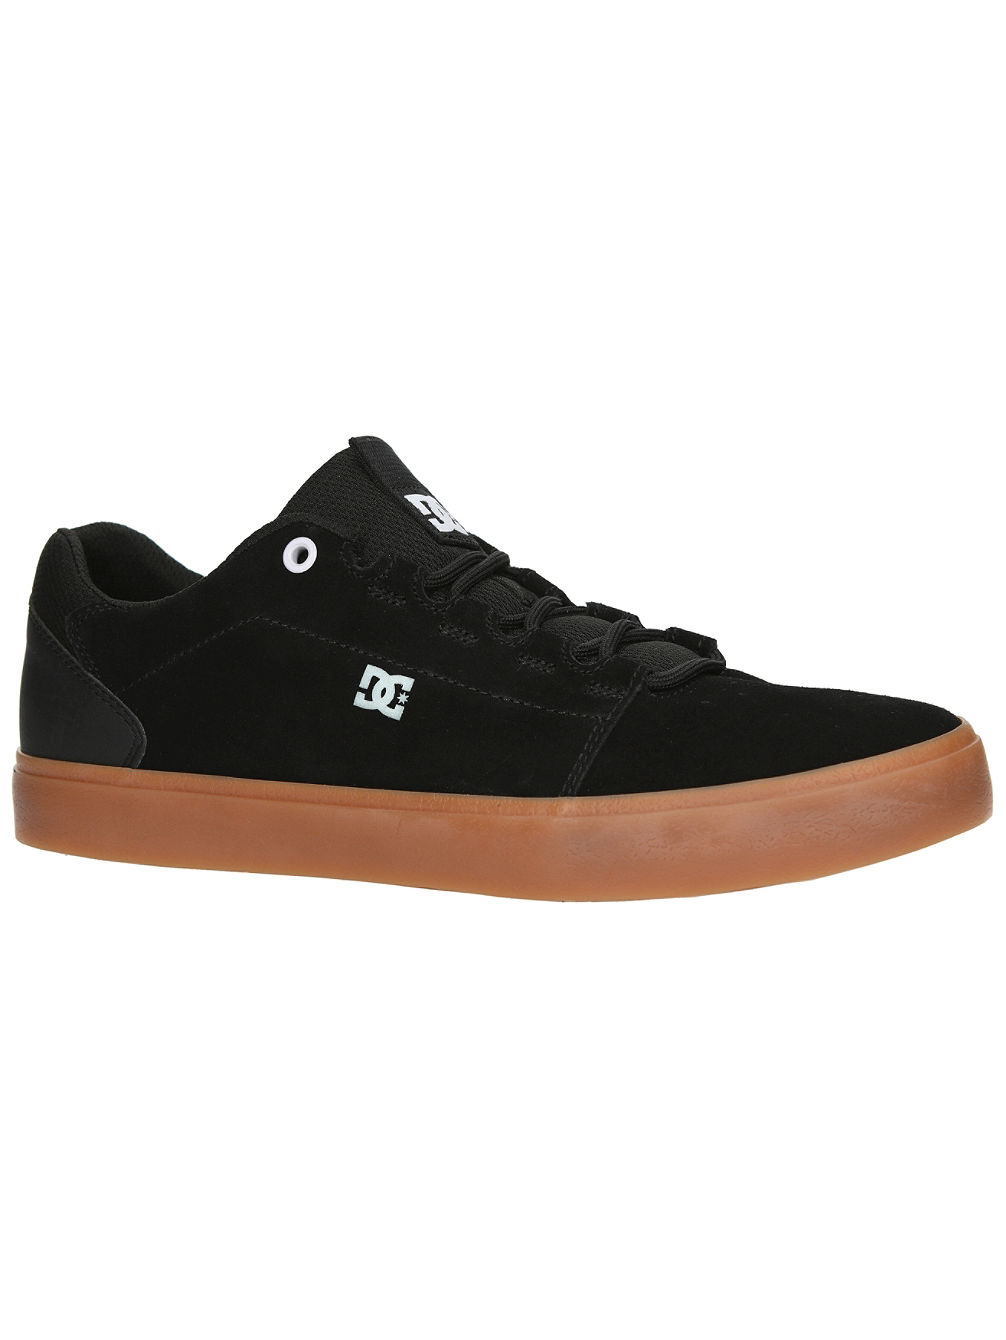 Hyde Skate Shoes